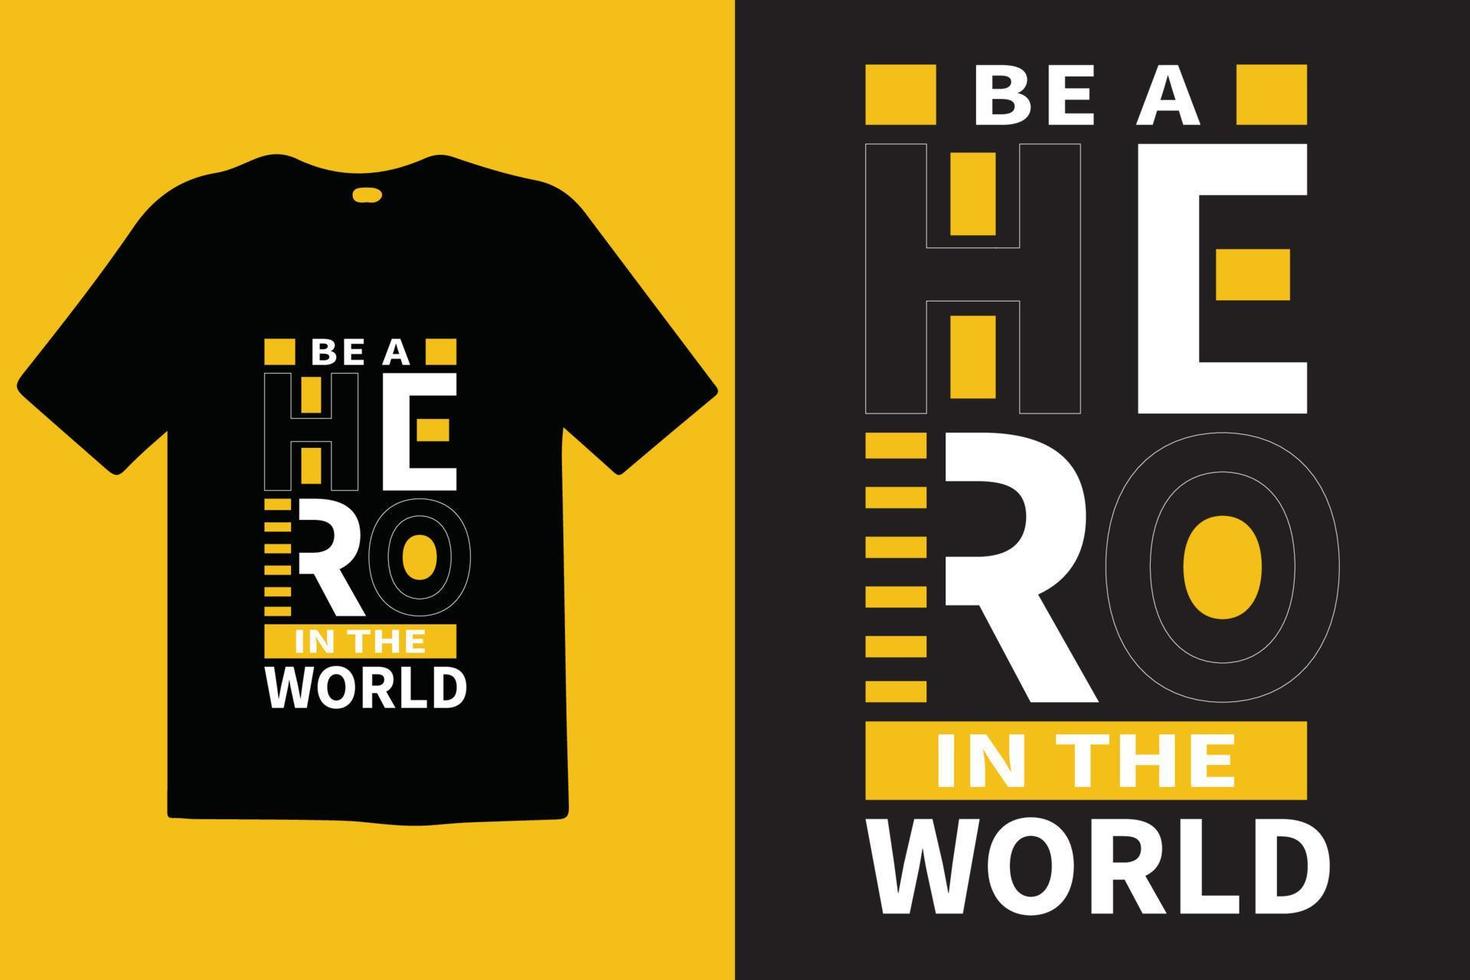 Be A Hero In The World typography lettering quotes. T-shirt design. Inspirational and motivational words Ready to print. Stylish t-shirt and apparel trendy design print, vector illustration. Premium.